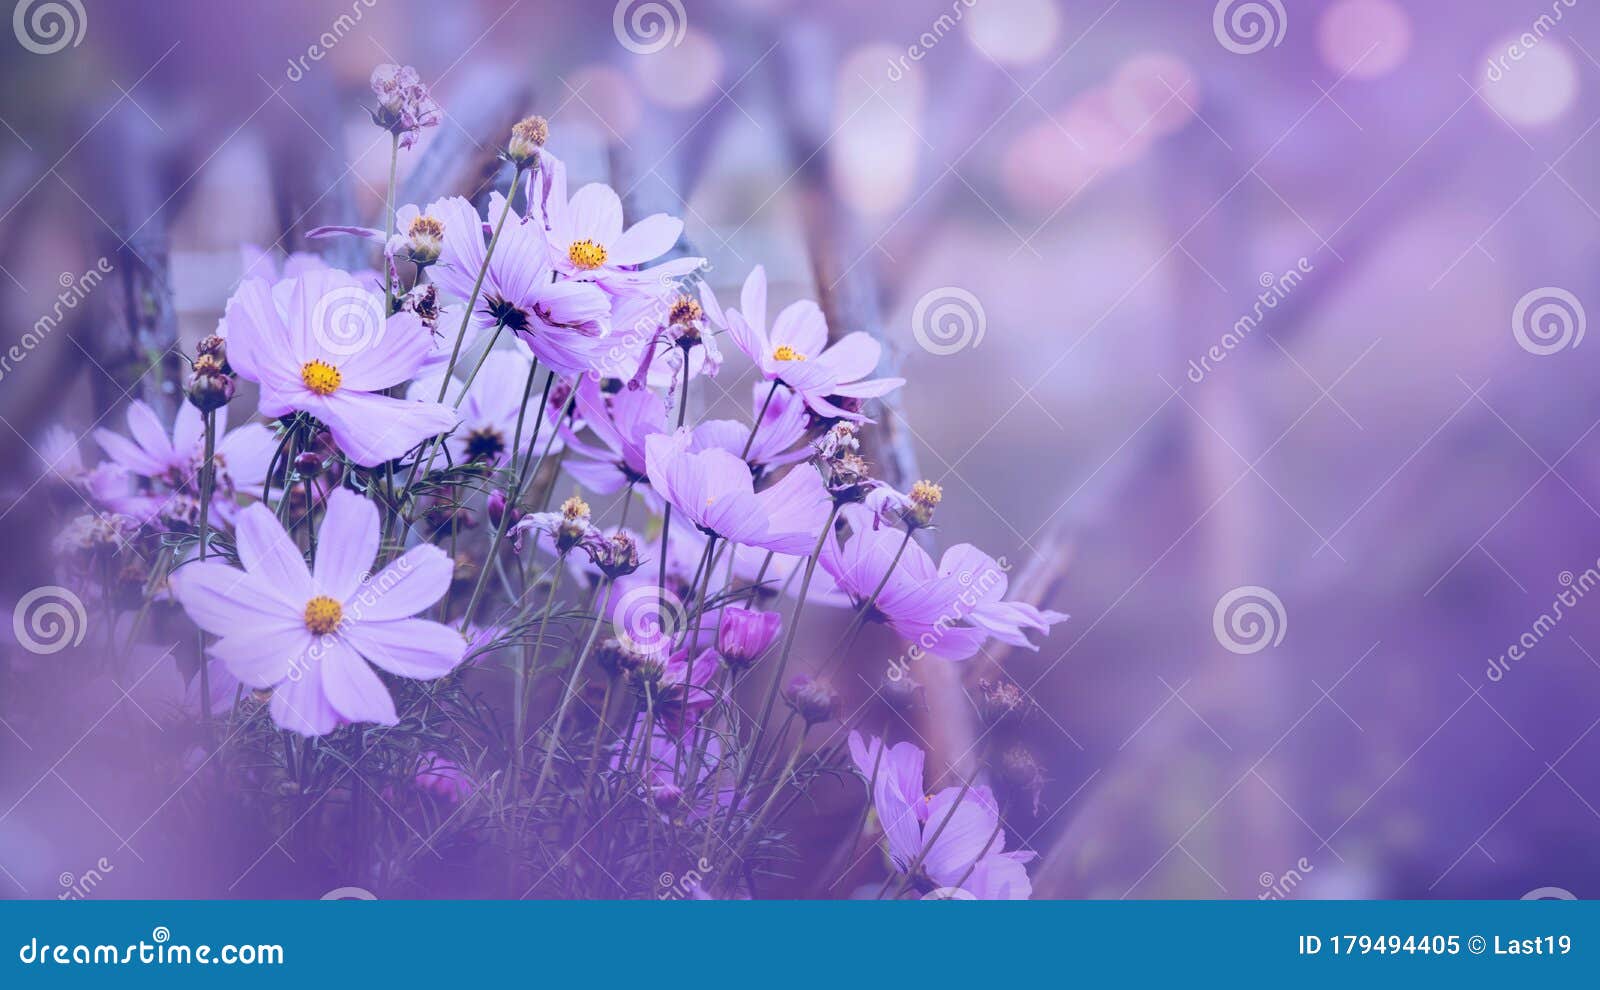 Background Nature Flower Mexican Aster. Purple Flowers. Background Blur  Stock Image - Image of celebration, flower: 179494405